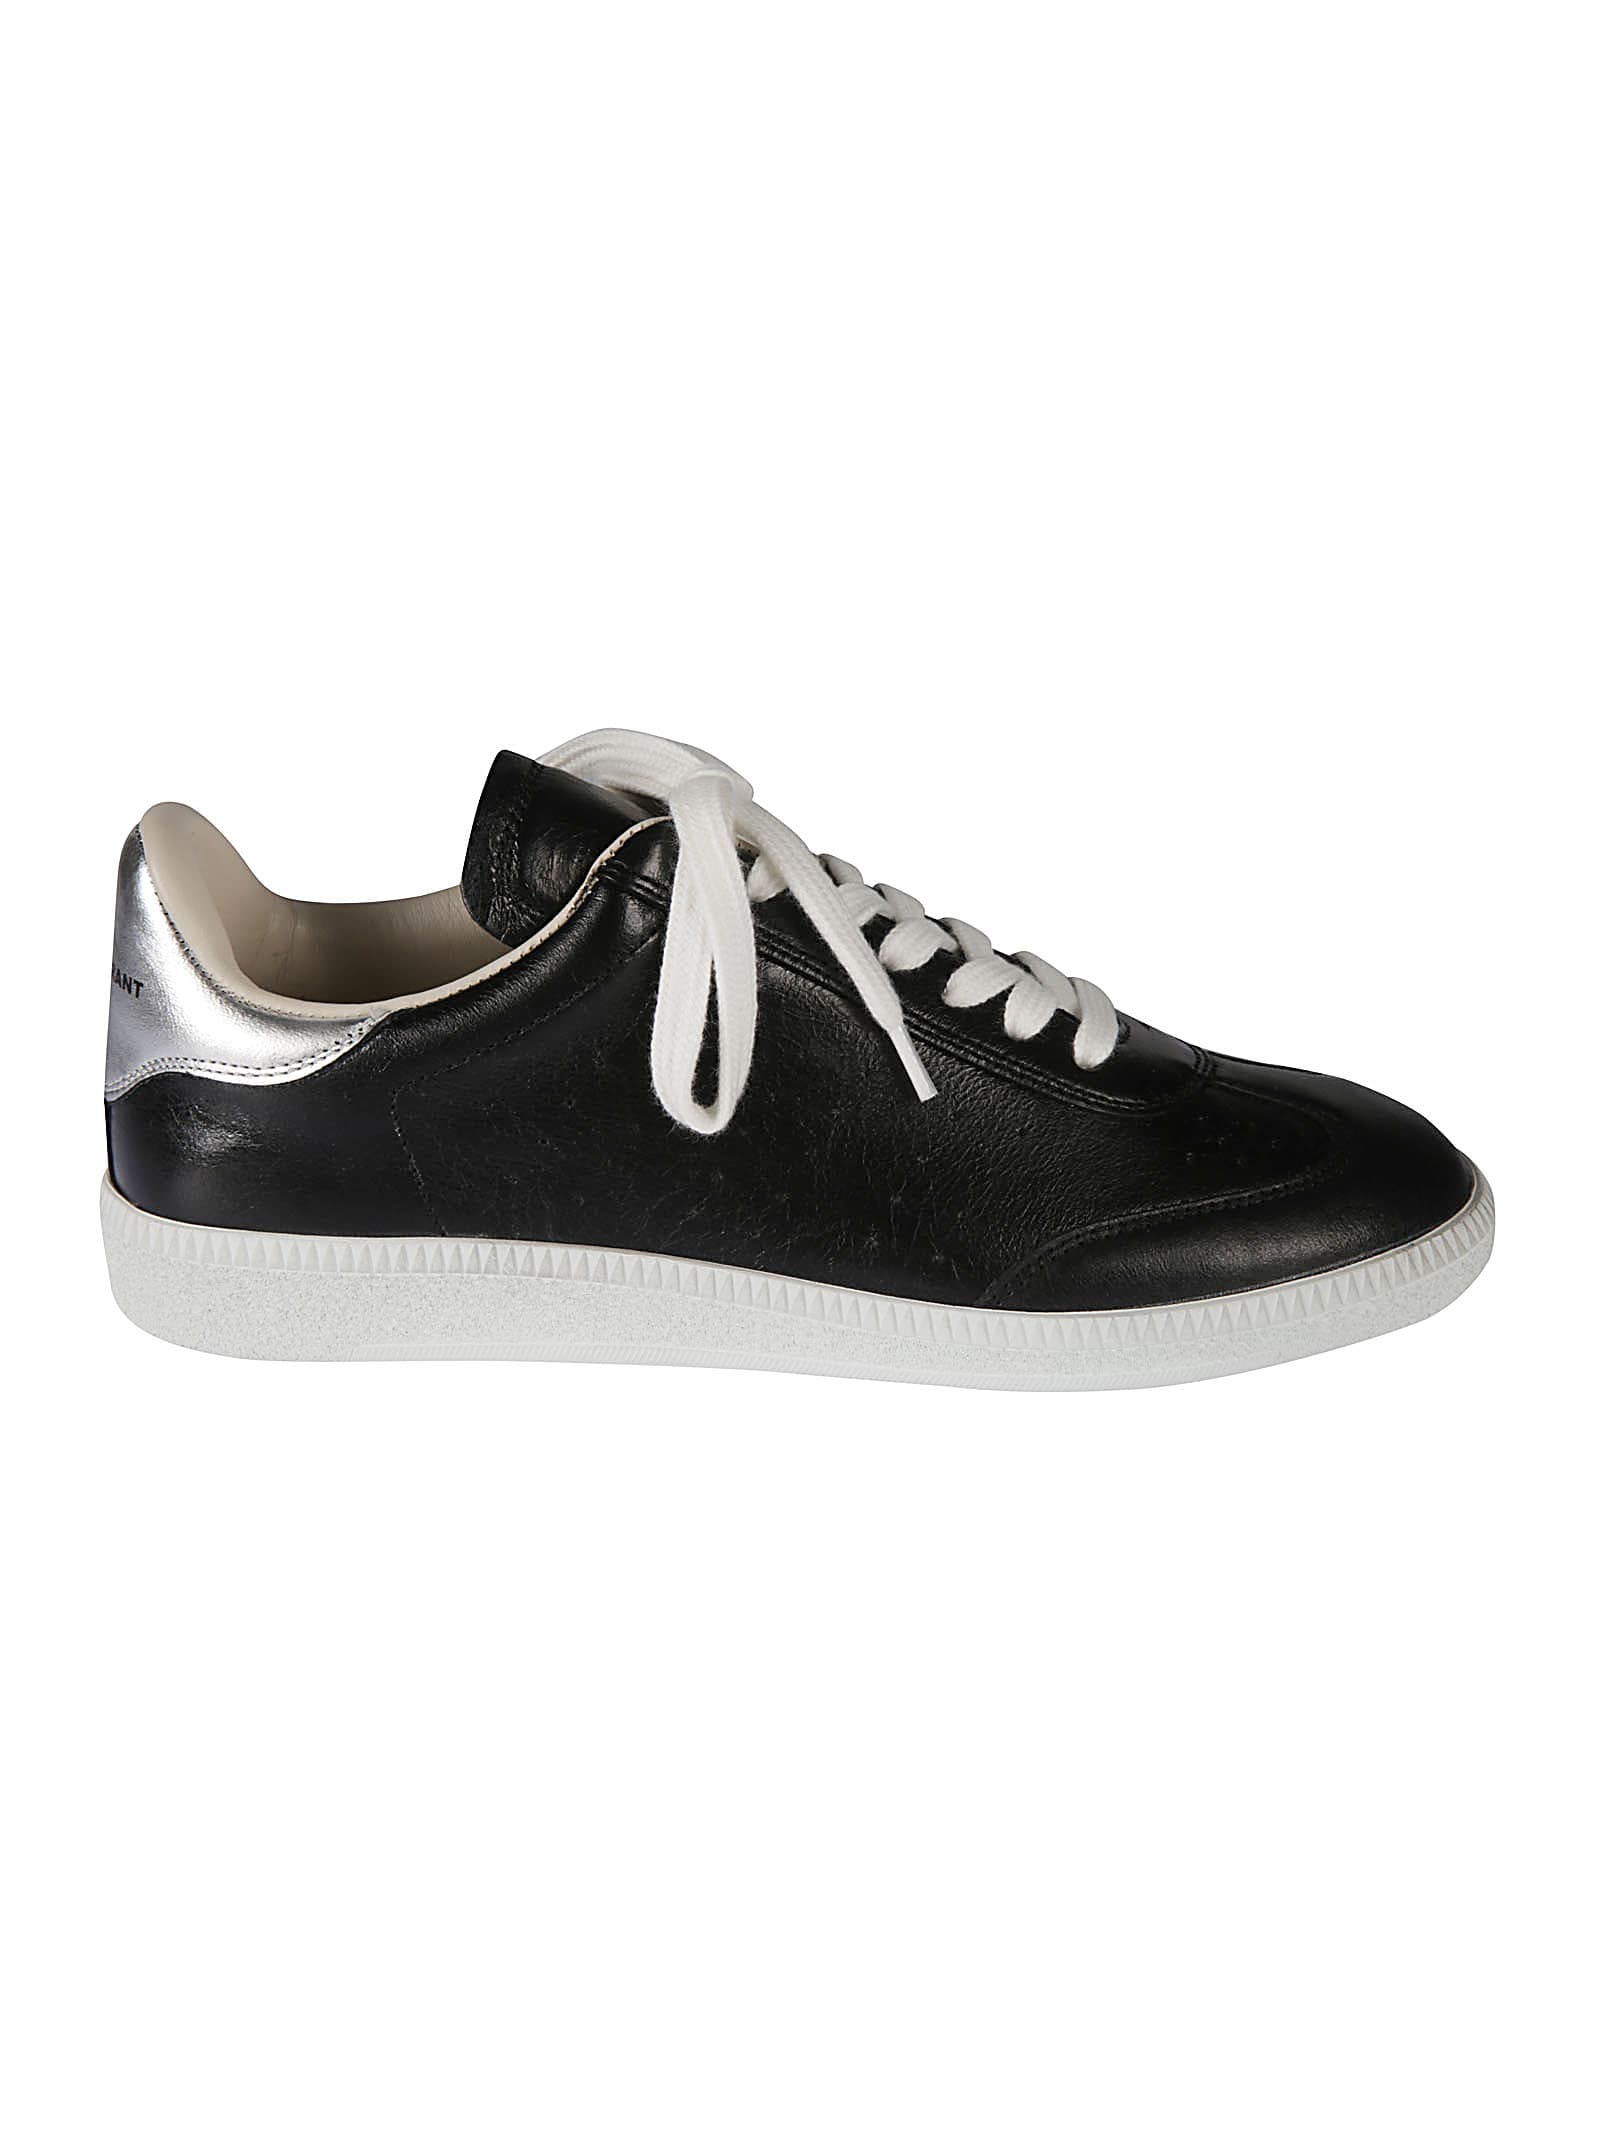 ISABEL MARANT PERFORATED DETAIL SNEAKERS,BK0029-21E019S BRYCE01BK